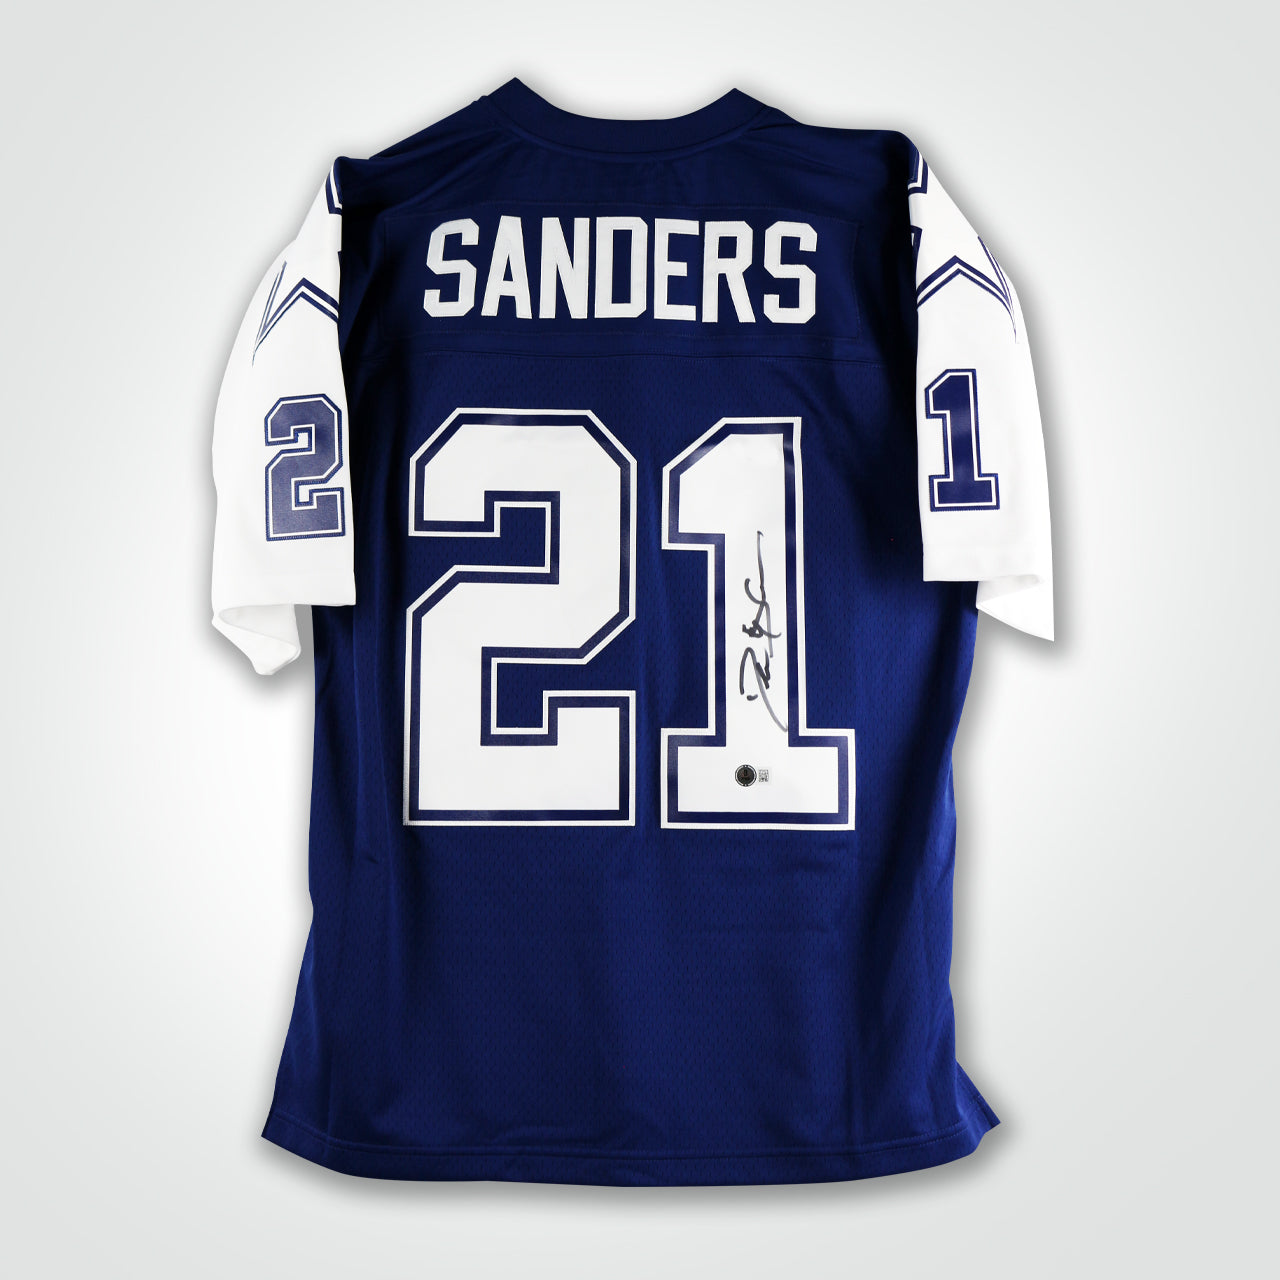 Deion Sanders Signed Cowboys Mitchell & Ness Replica Jersey